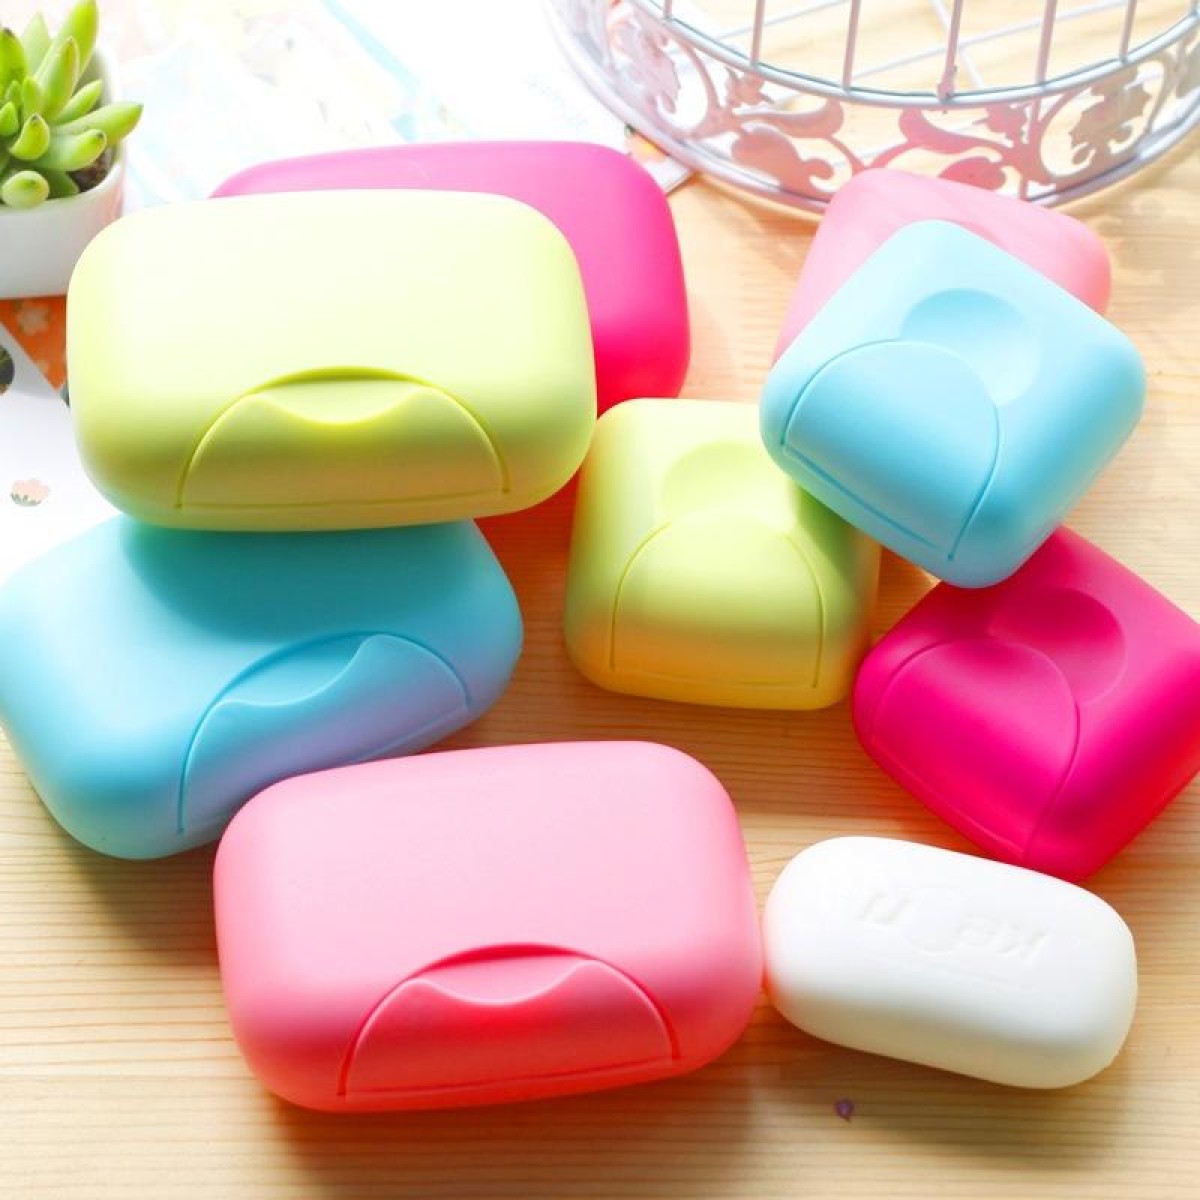 Home Travel Soap Box Lock Sealed Waterproof Leakproof Soap Holder Case with Cover Soap Dishes Container,Random Color Delivery,Large,Size:12x8x4cm